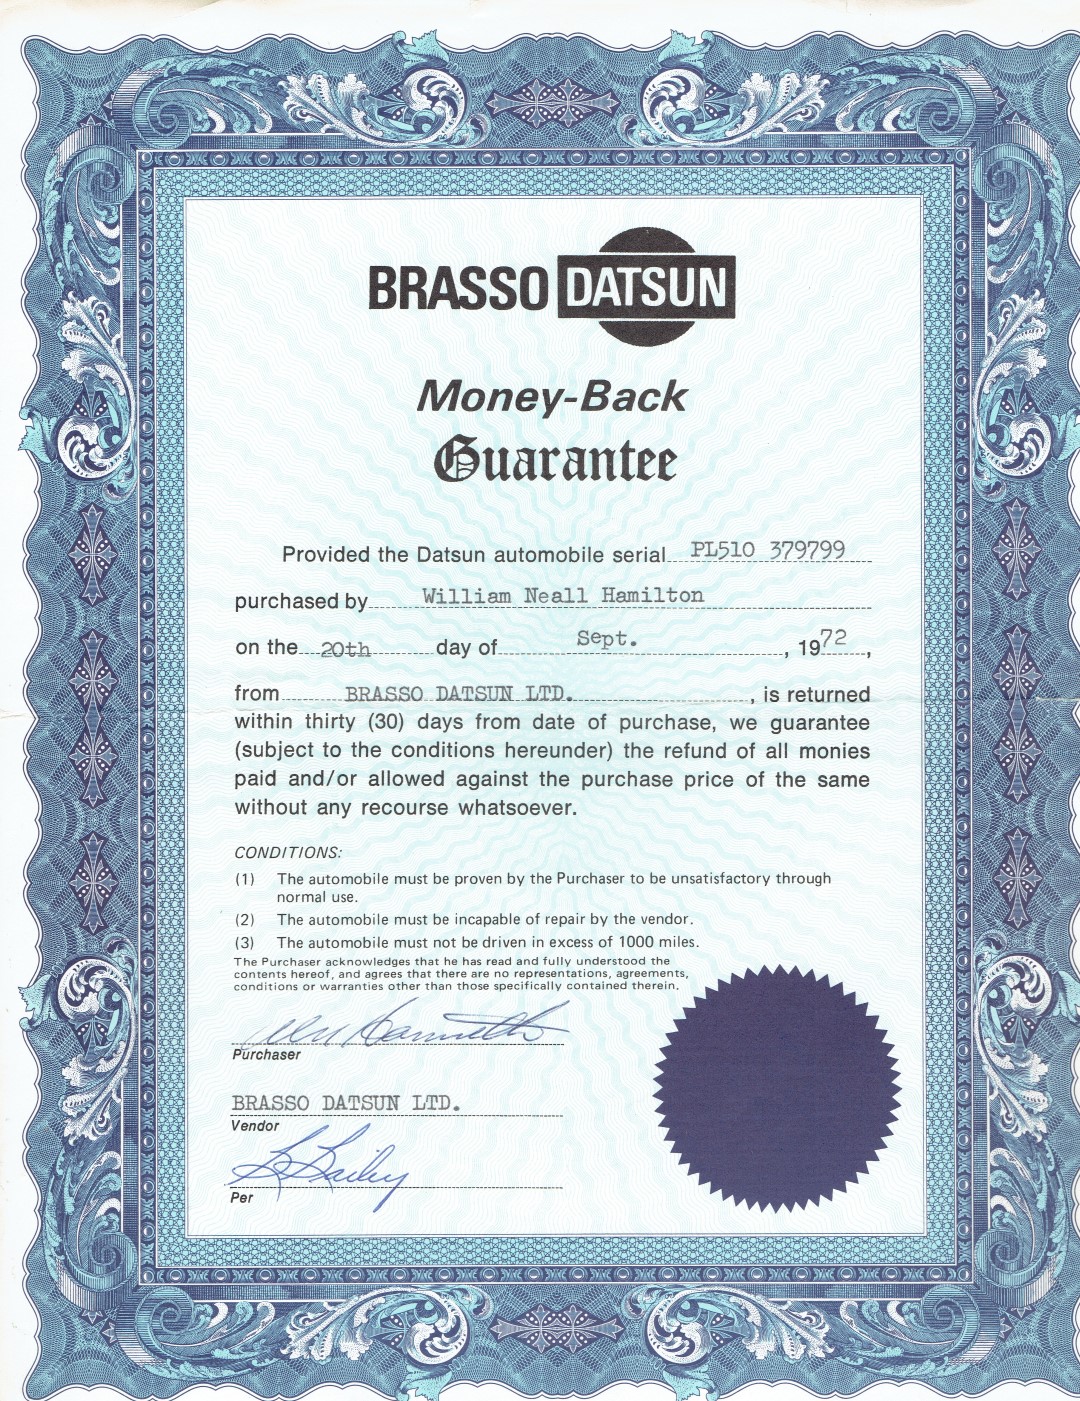 The Brasso Datsun Guarantee that came with my 1972